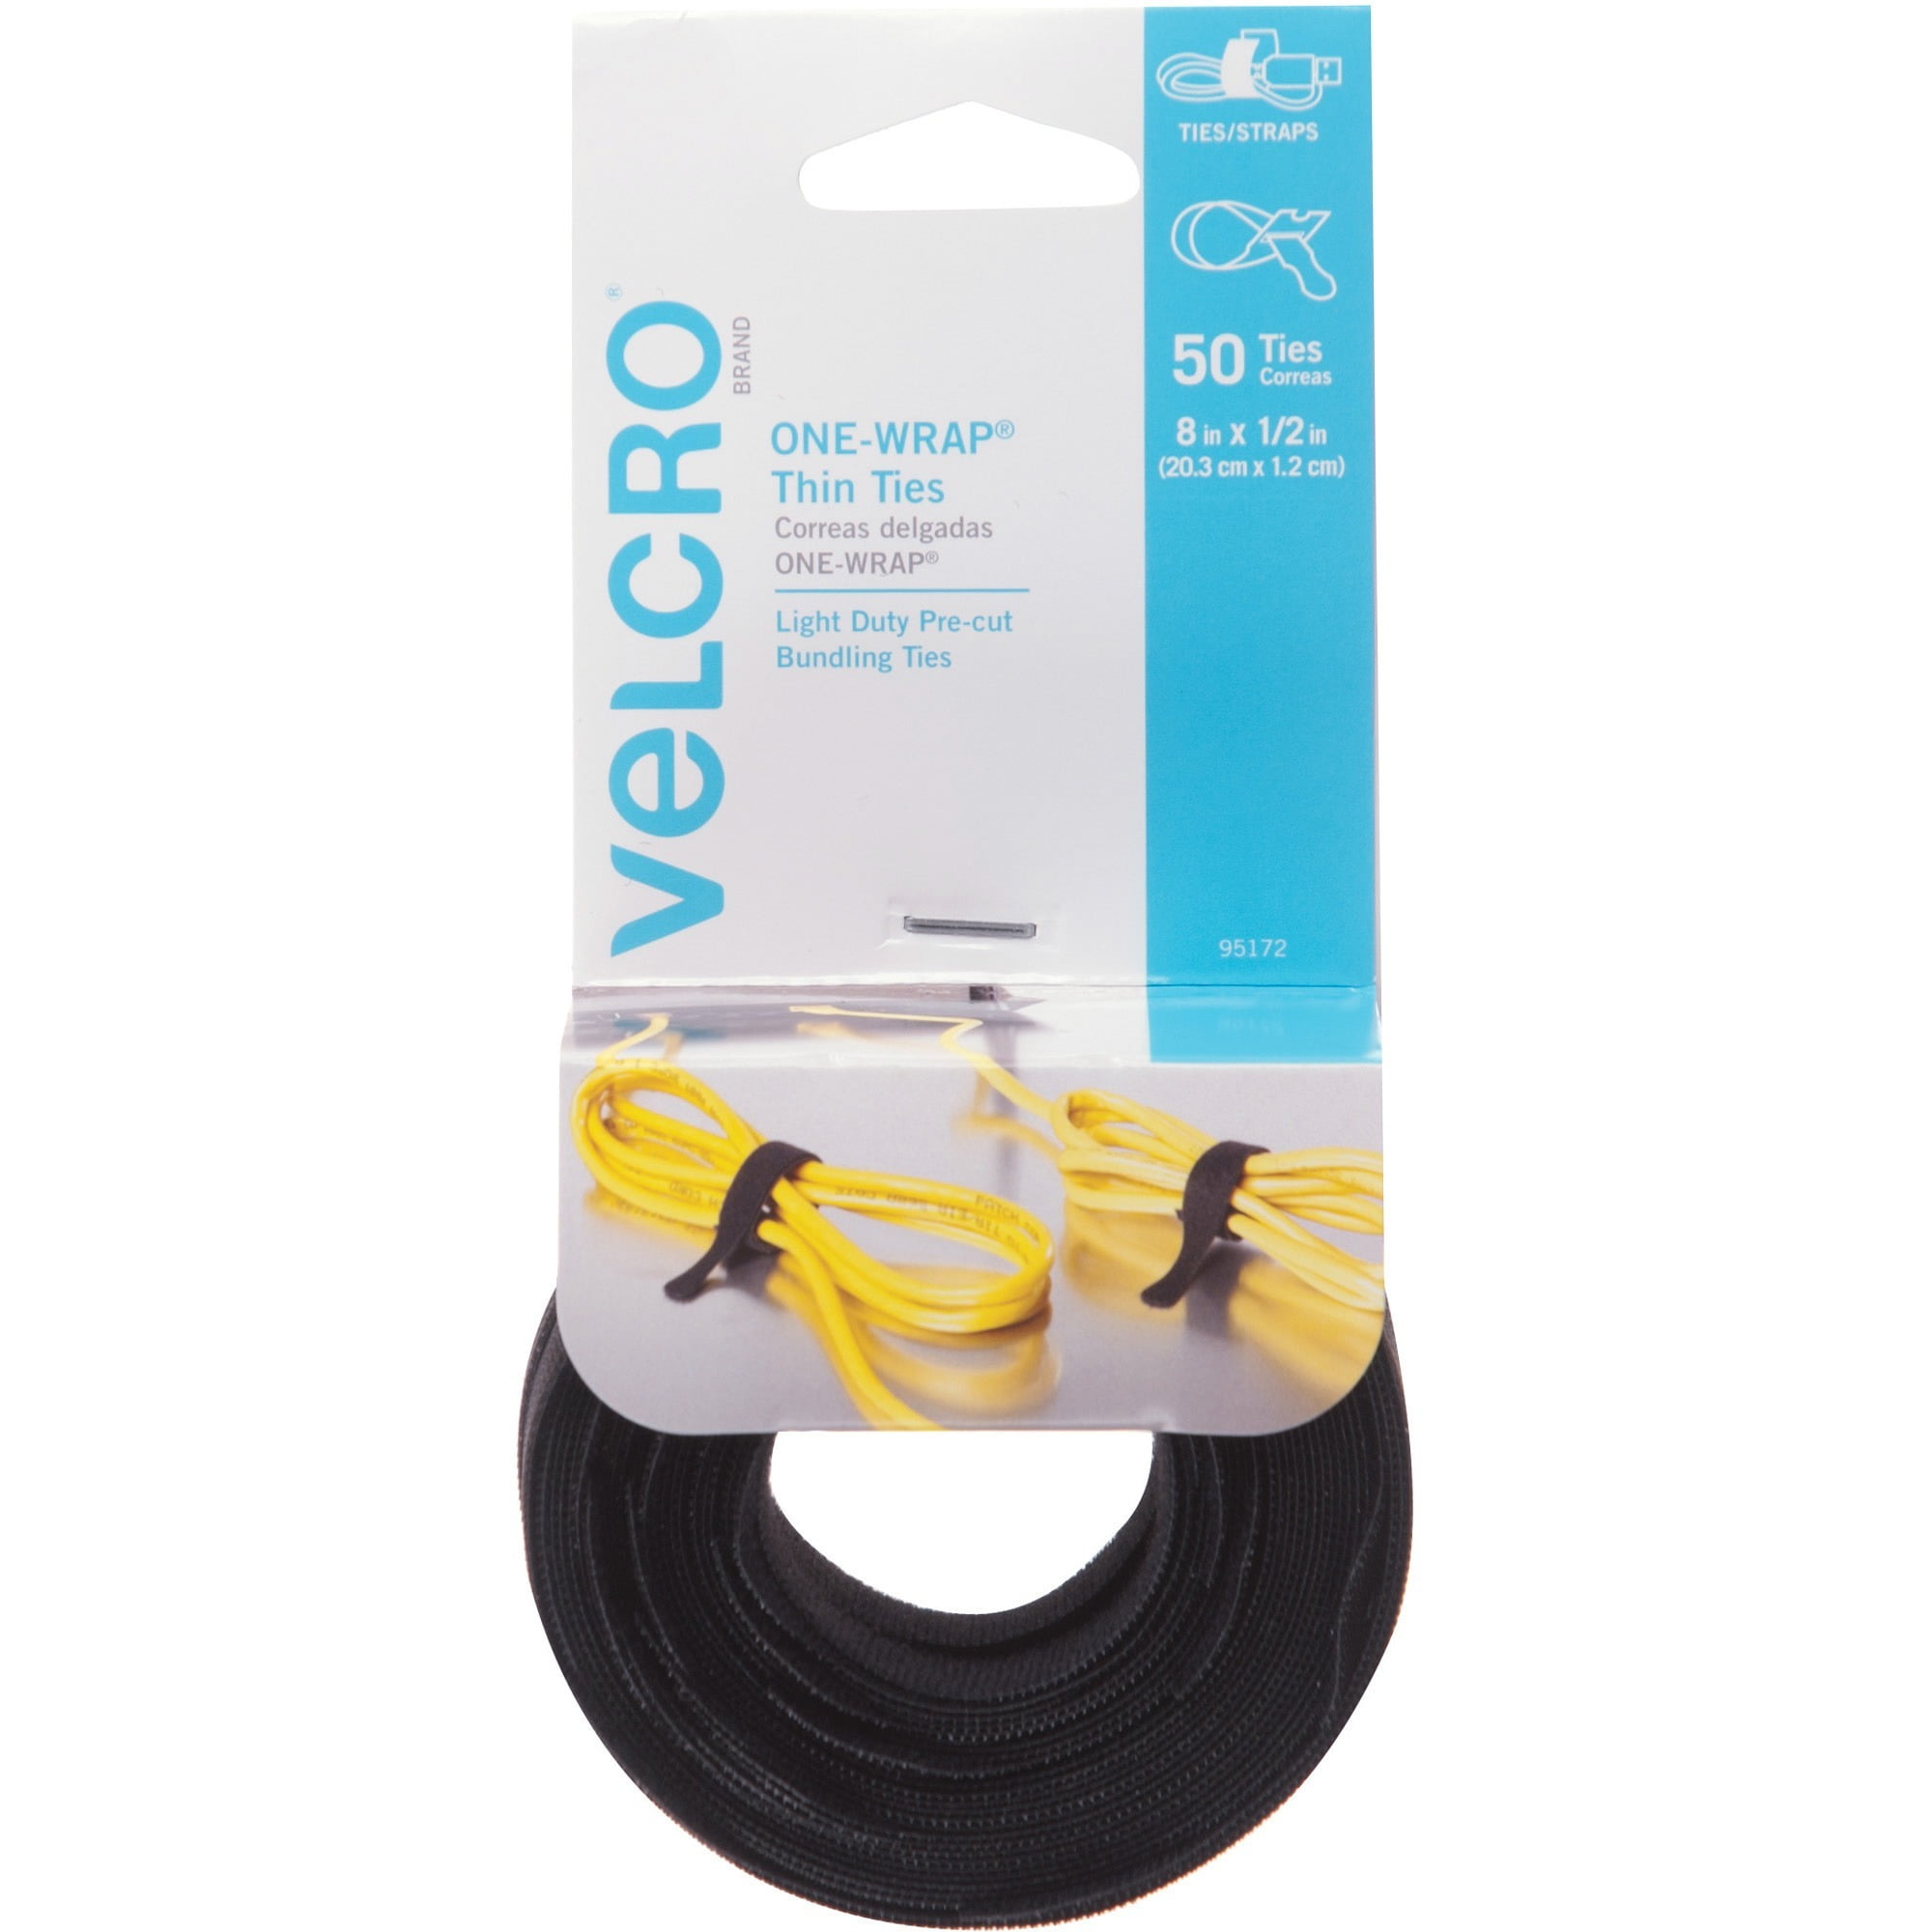 10 x Velcro Cable Ties 30 cm x 20 mm Black Velcro Bands Velcro Cable with Eyelet 